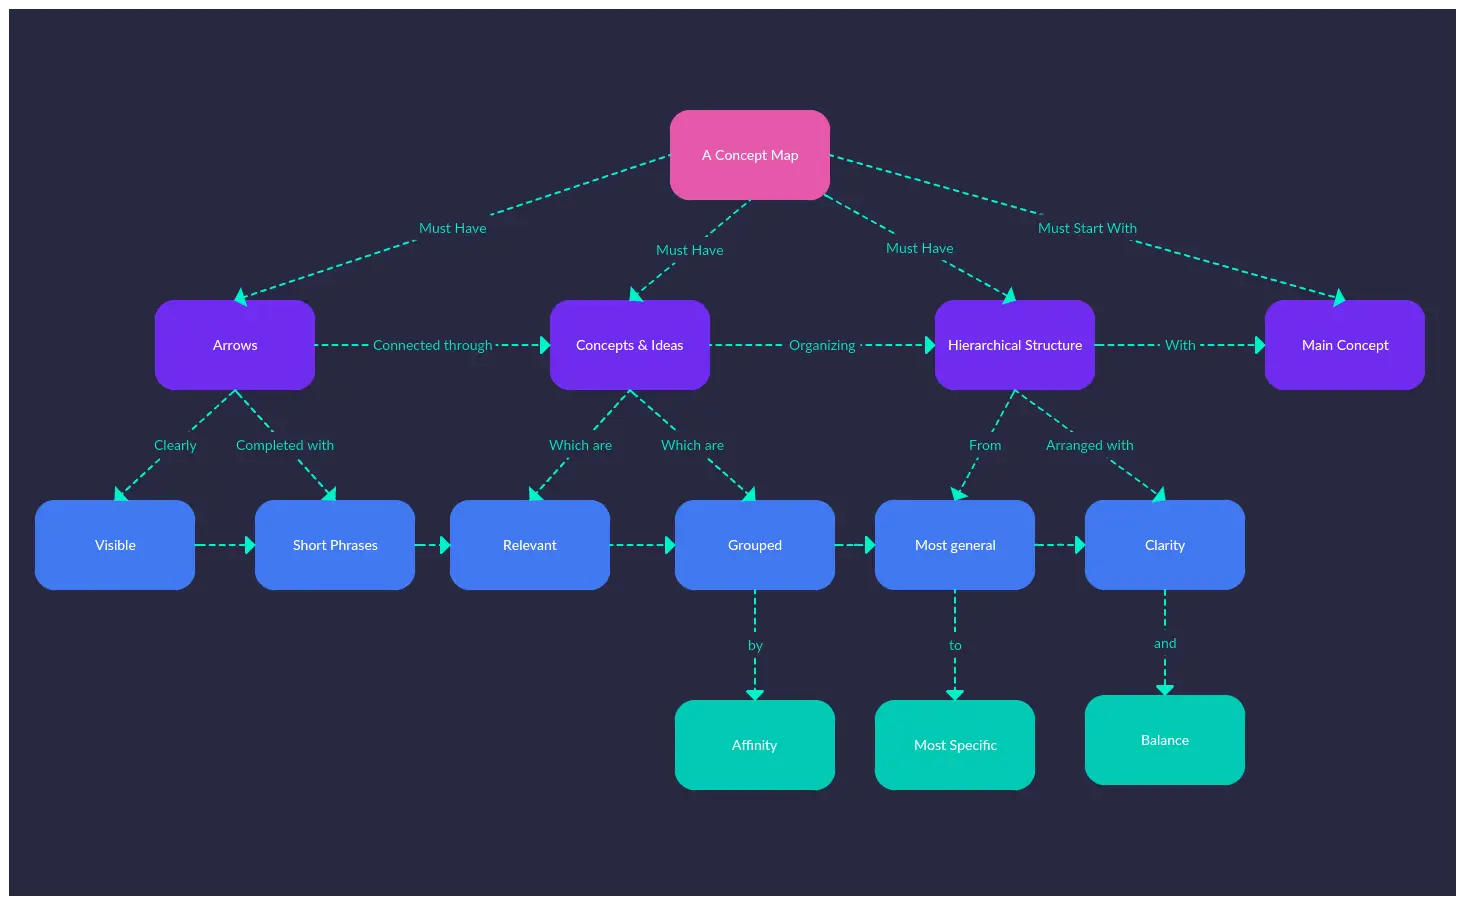 The Ultimate Guide To Concept Maps: From Its Origin To Concept Map Best  Practices | Creately